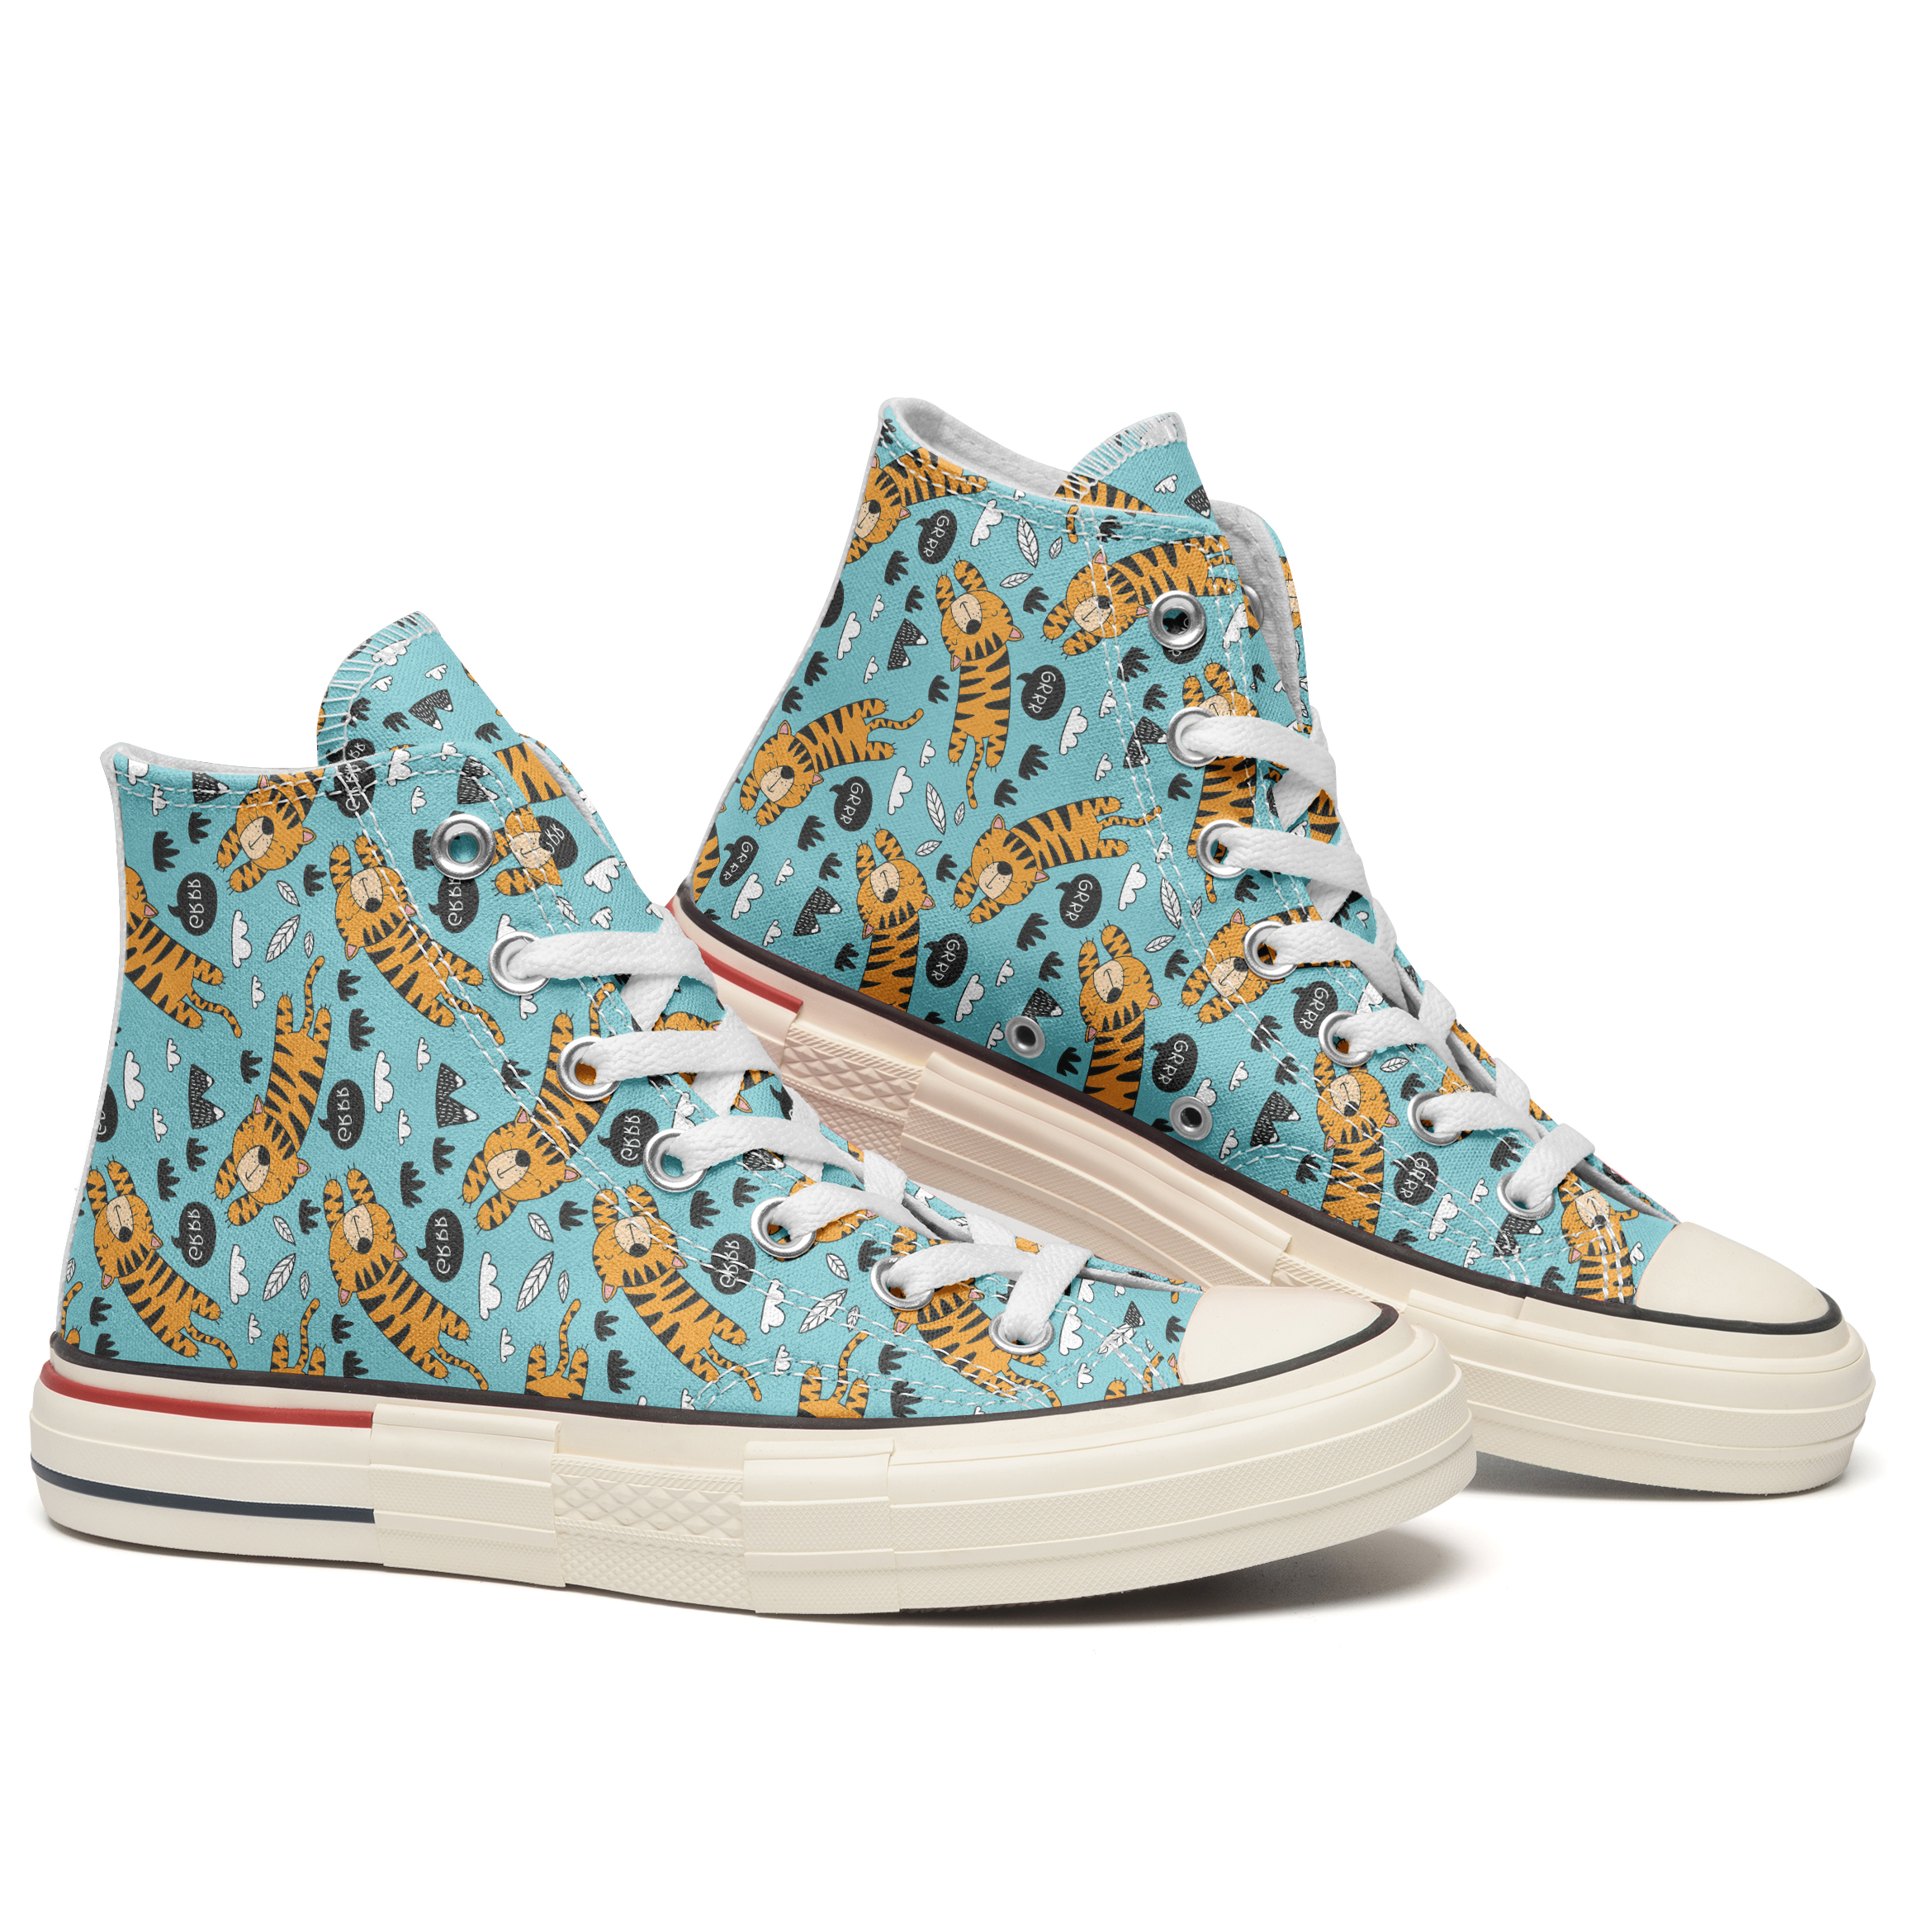 Happy Fairy Tail High Top Canvas Shoes Special Edition